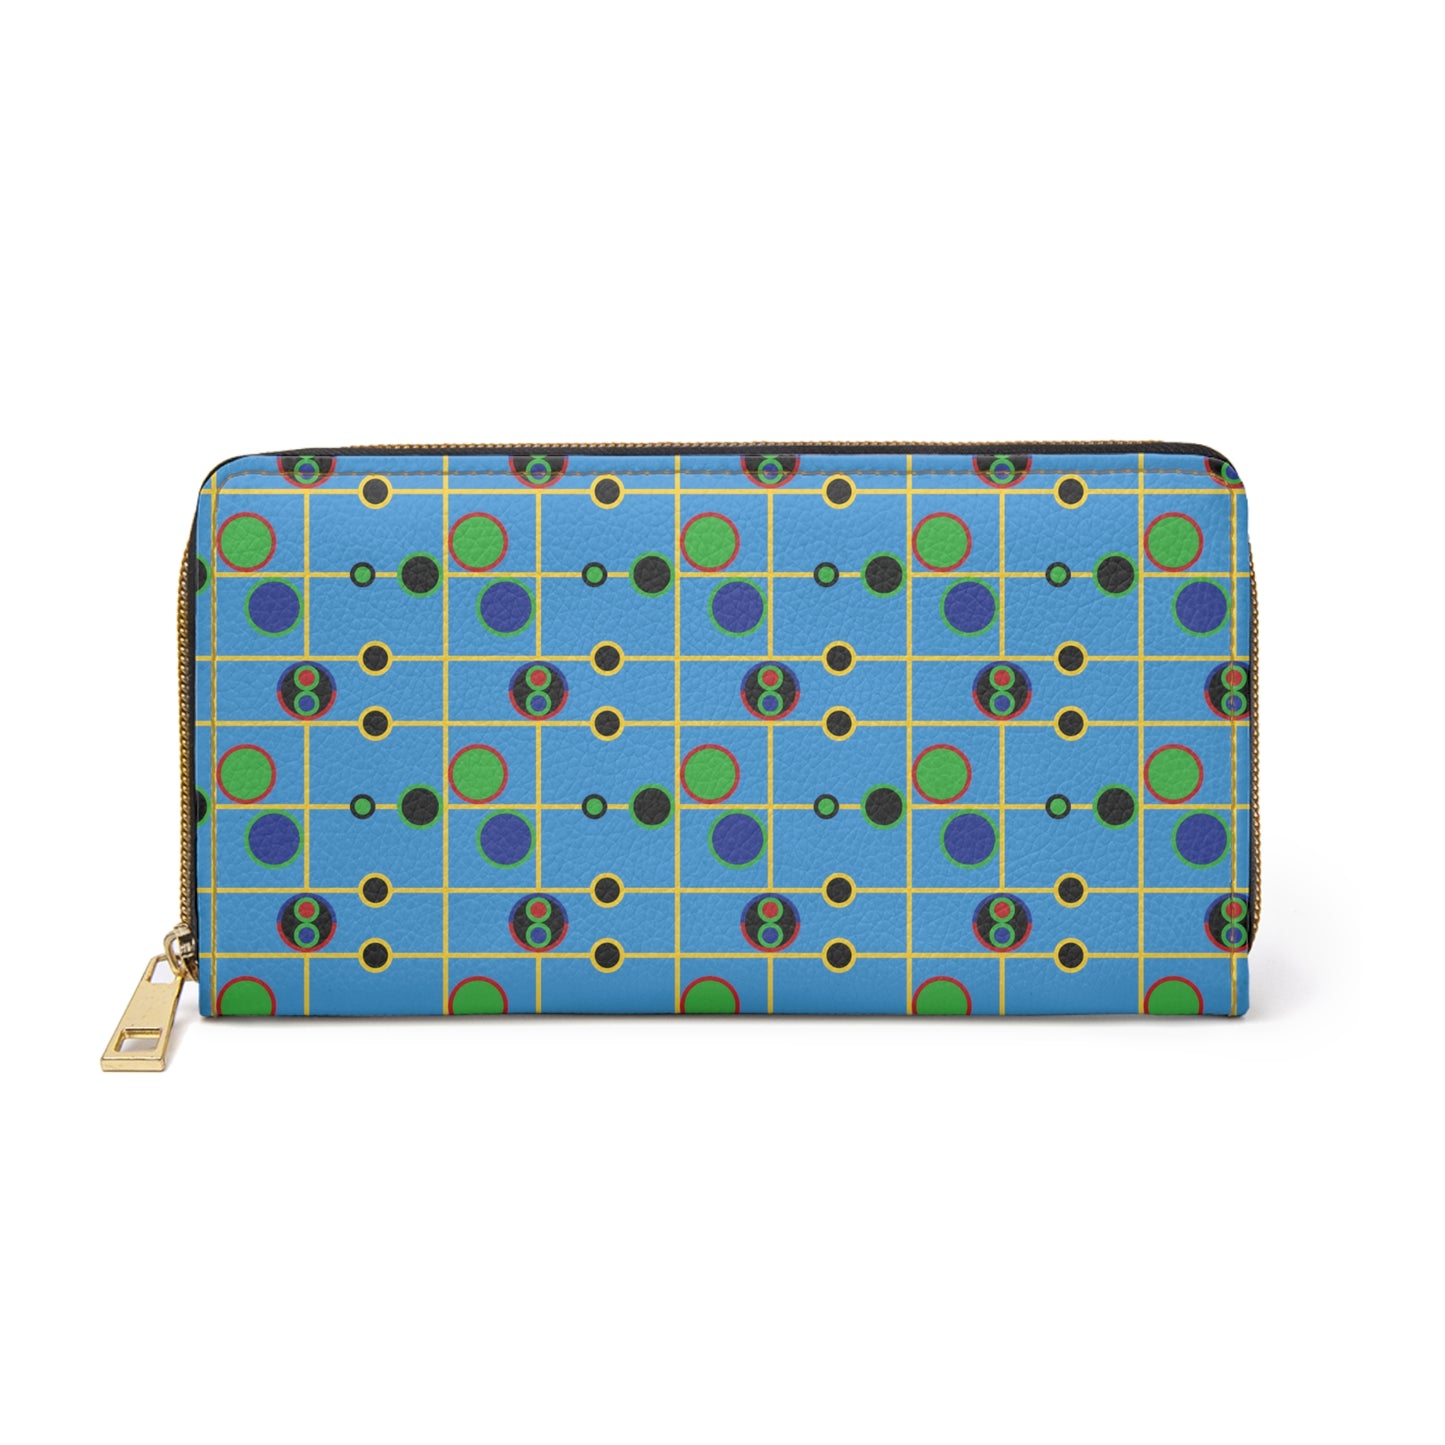 Geometric Yellow Grid with Circles - Blue 00A8FF - Zipper Wallet